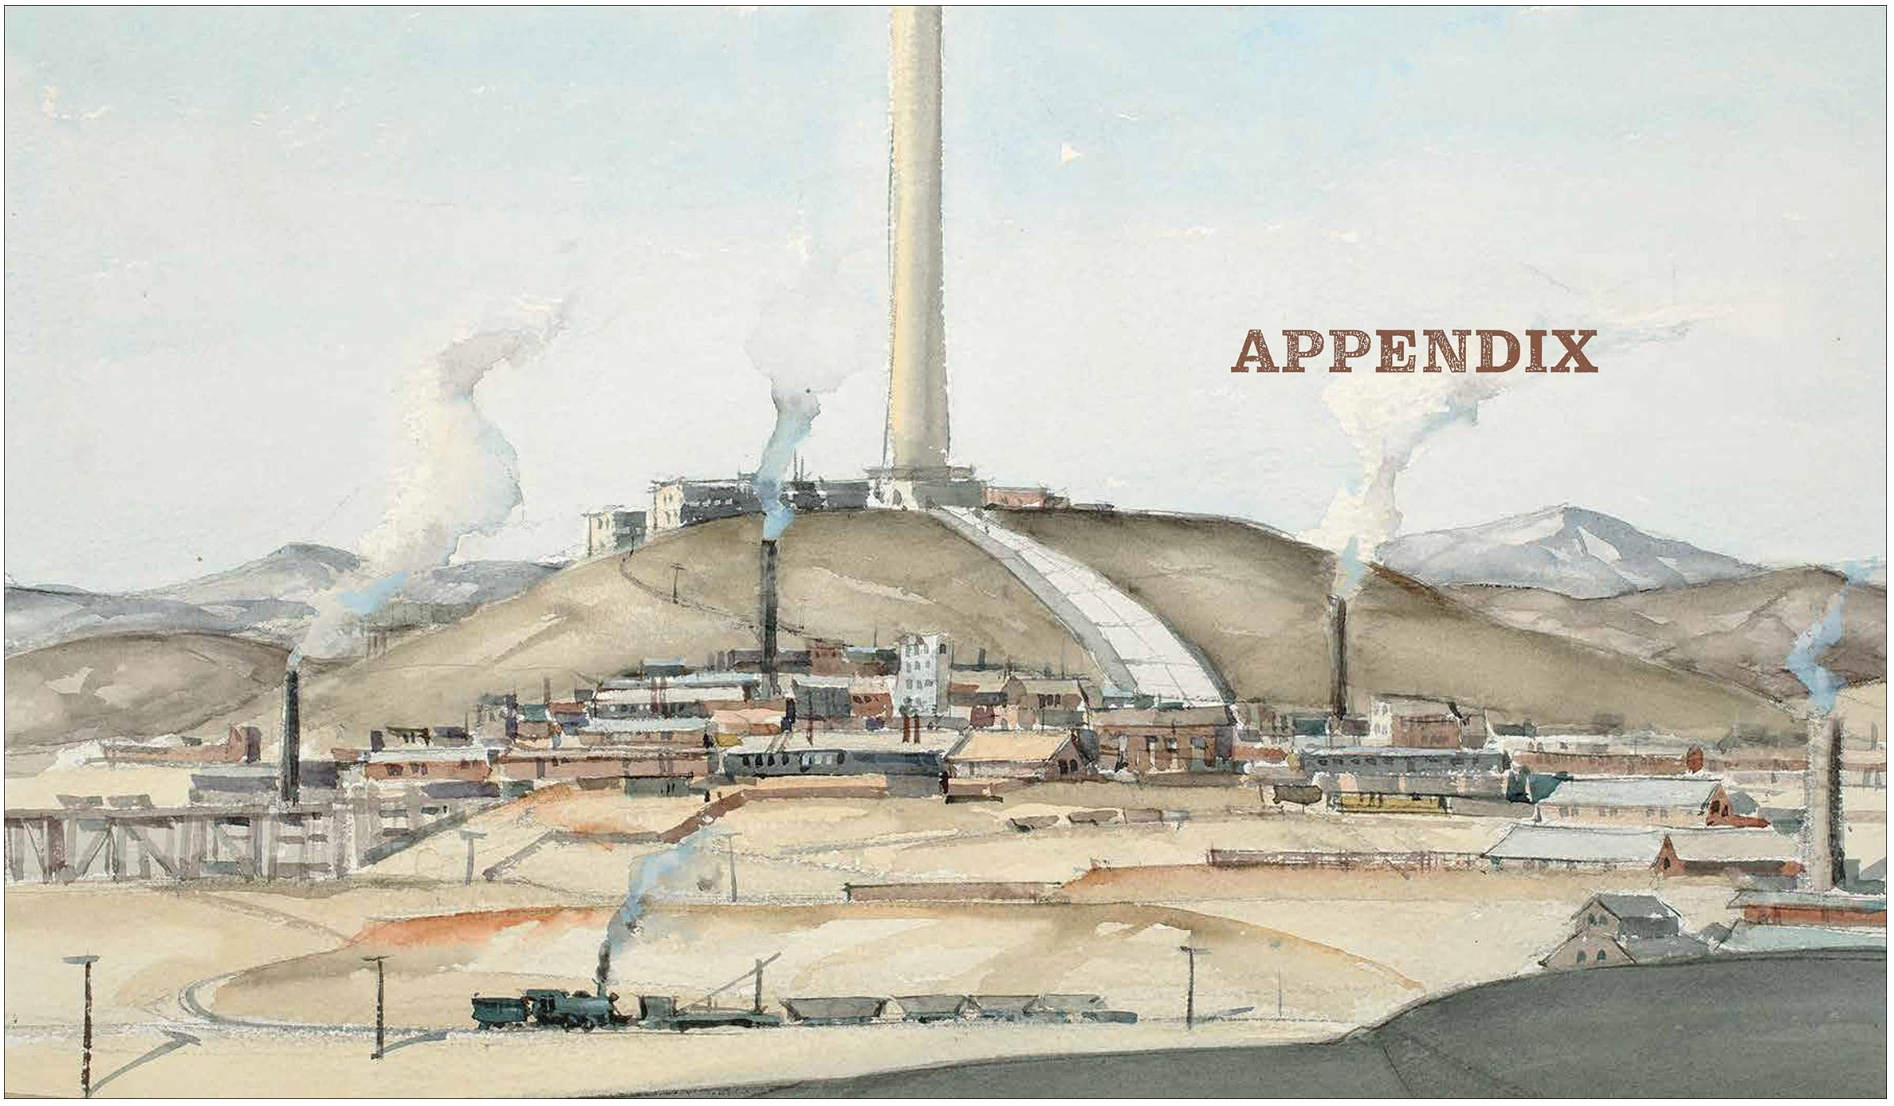 Painted Appendix page from 'Landscapes of Extraction: The Art of Mining in the American West'